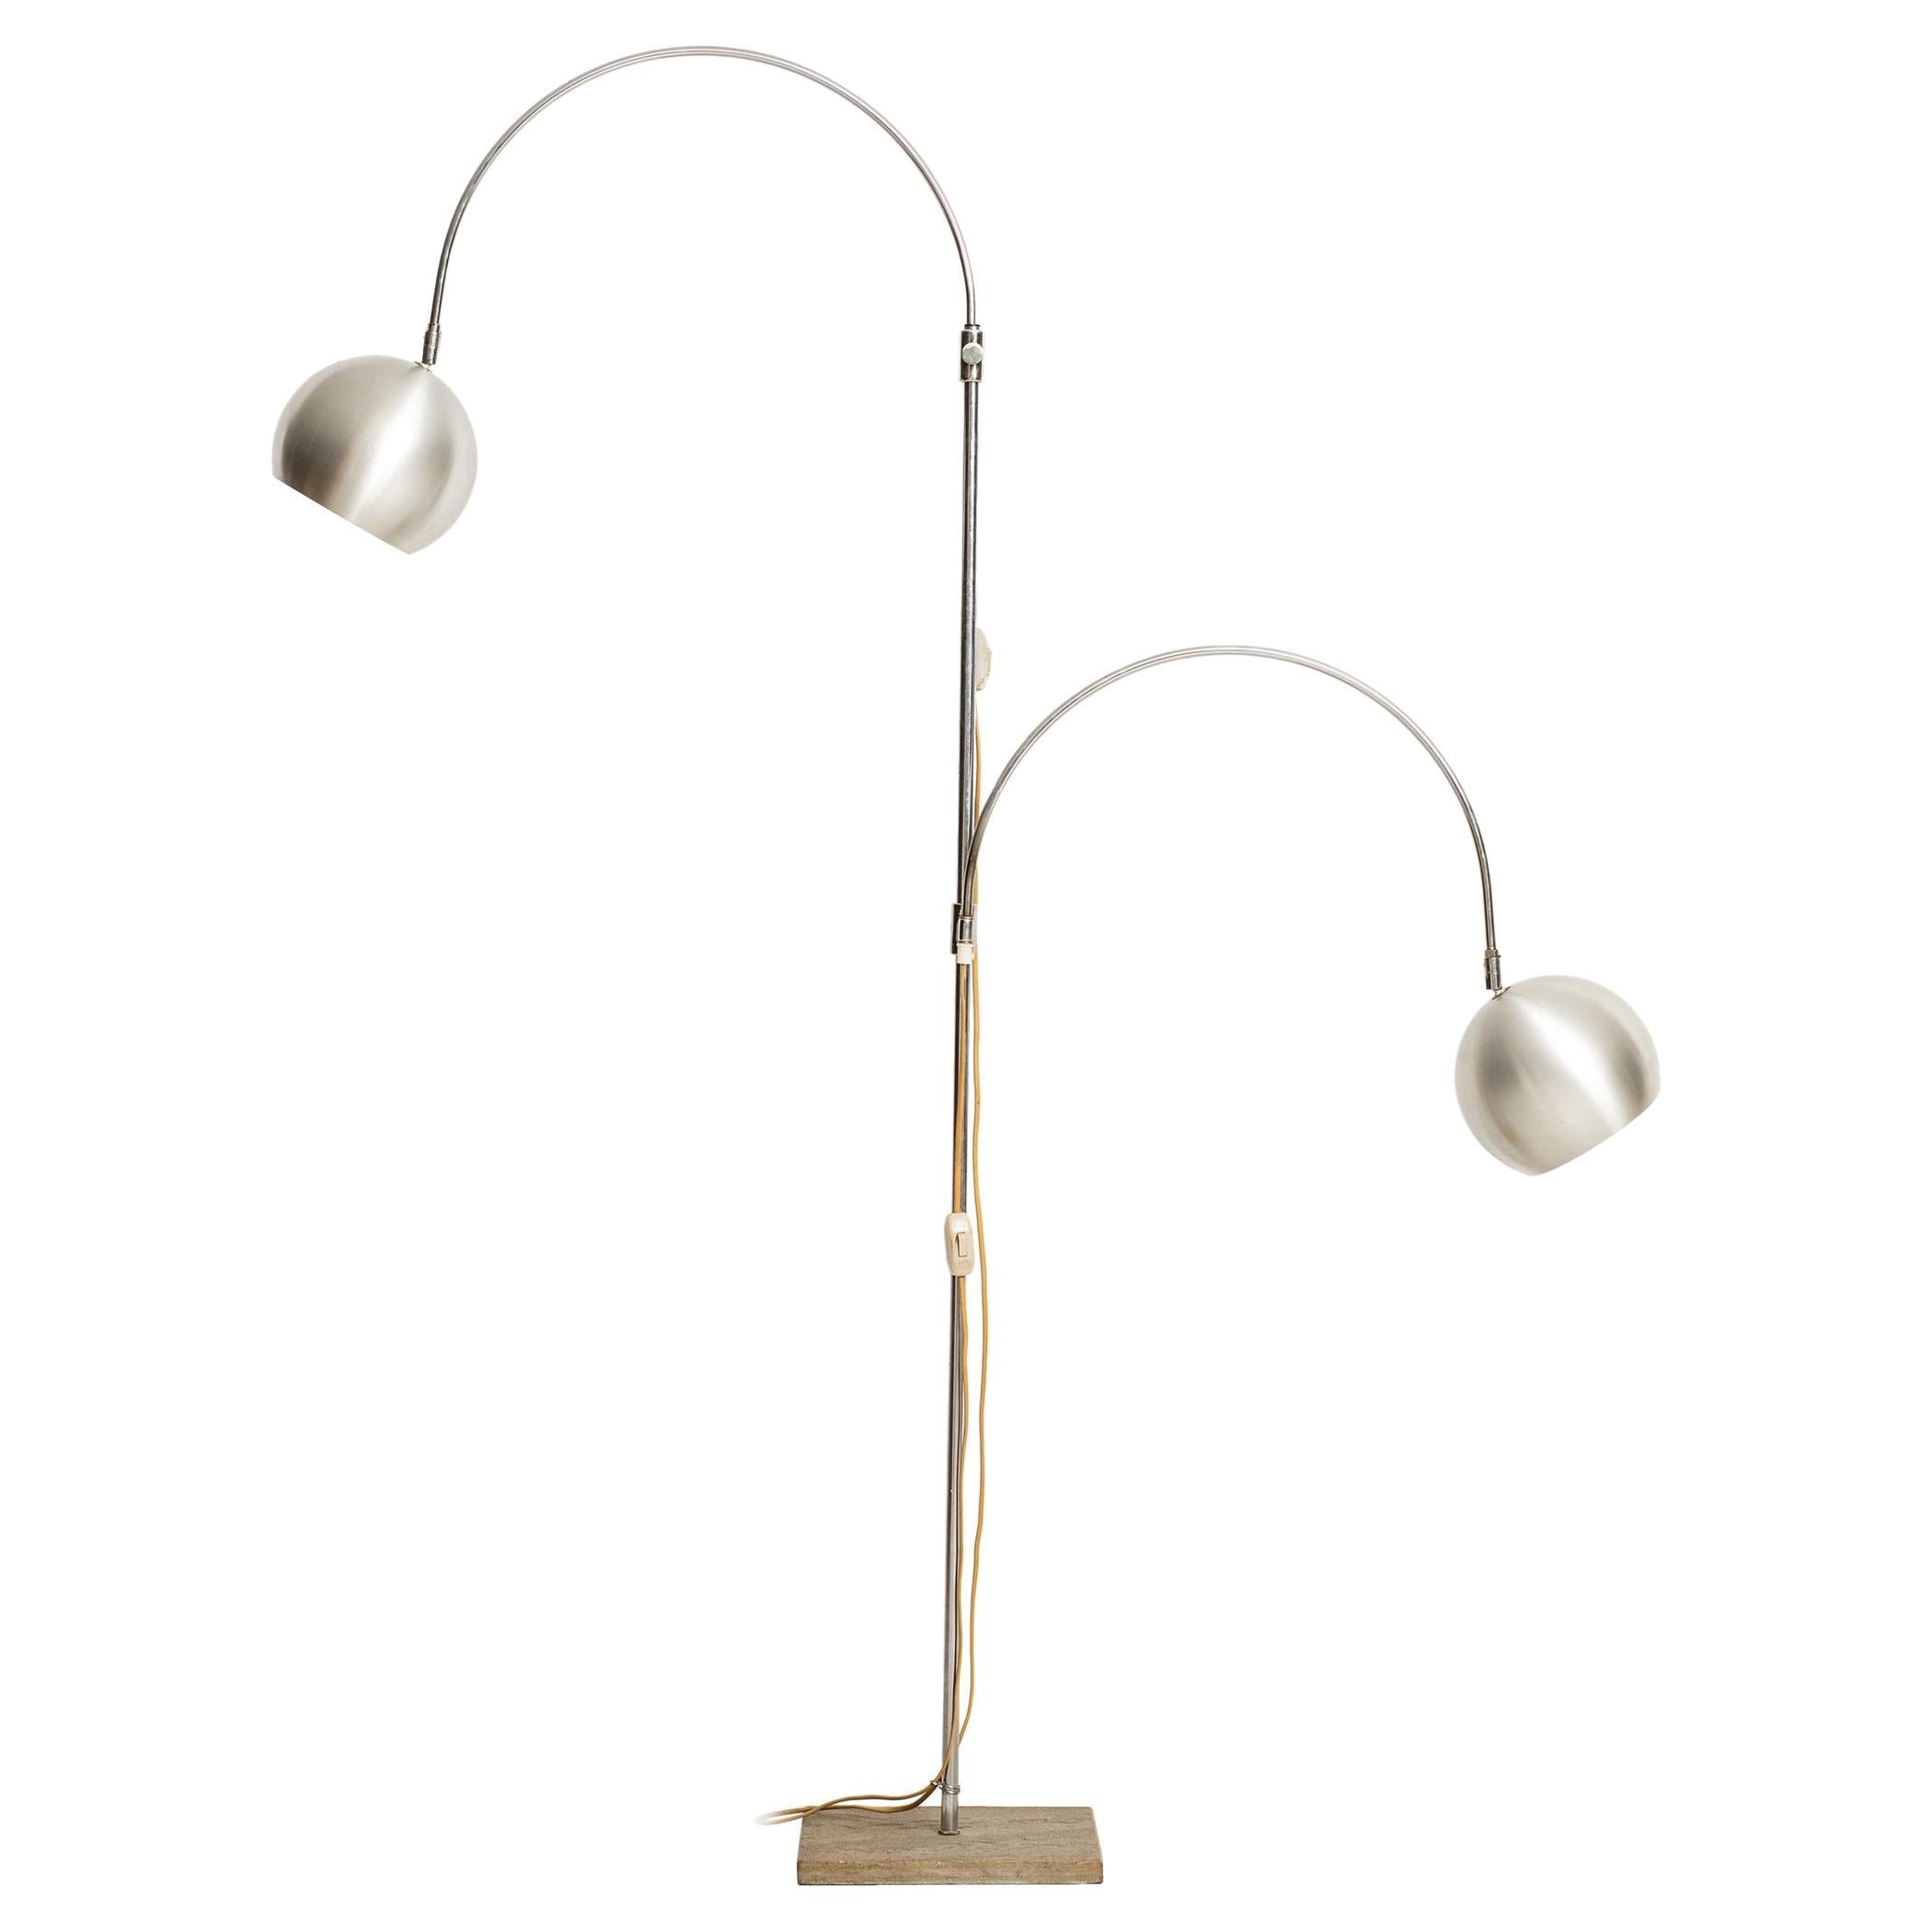 Large Floor Lamp with 2 Flexible Arms Produced in Italy